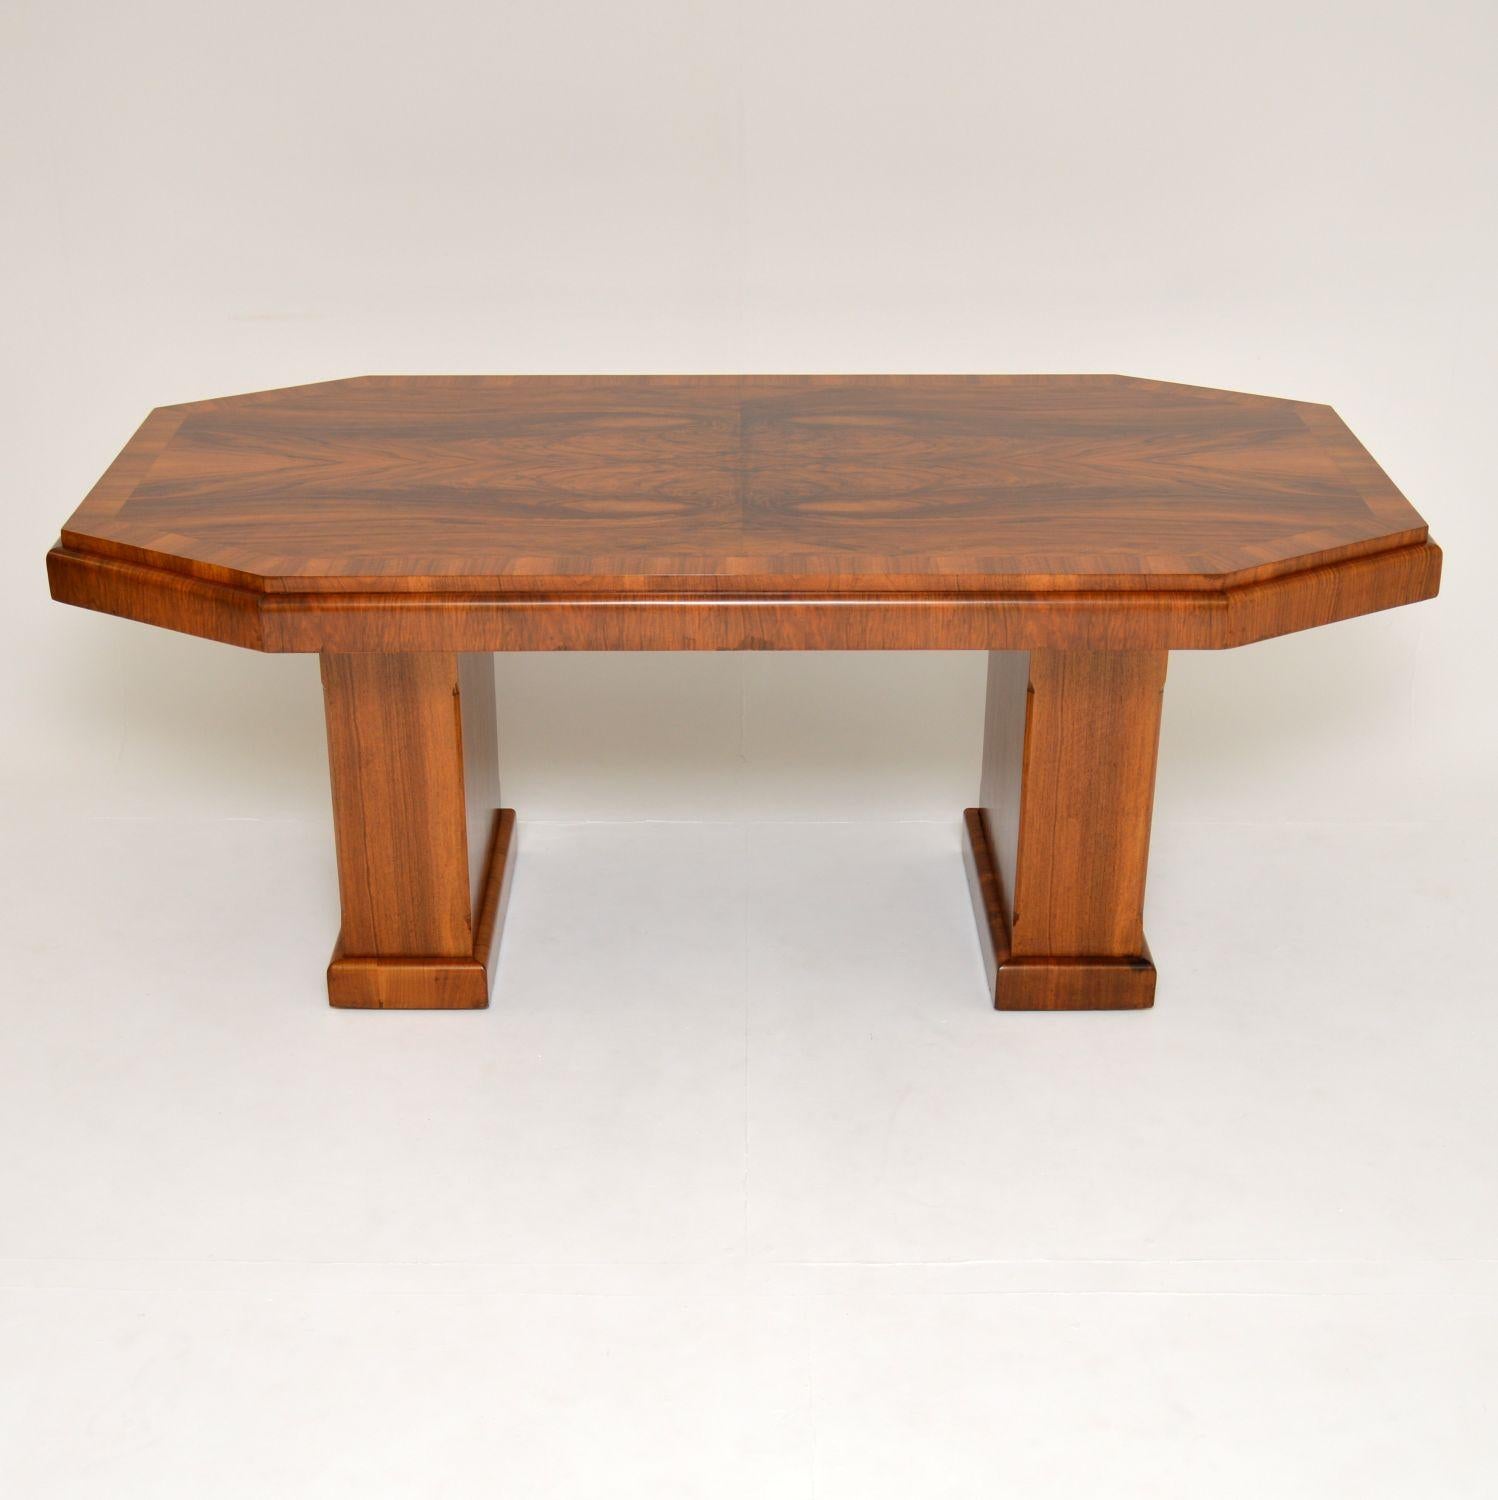 A stunning original Art Deco period dining table in walnut. This was made in England, it dates from the 1920s-1930s.

It is of amazing quality, with thick edges and two fantastic pedestal bases. The bases detach and this comes apart in three